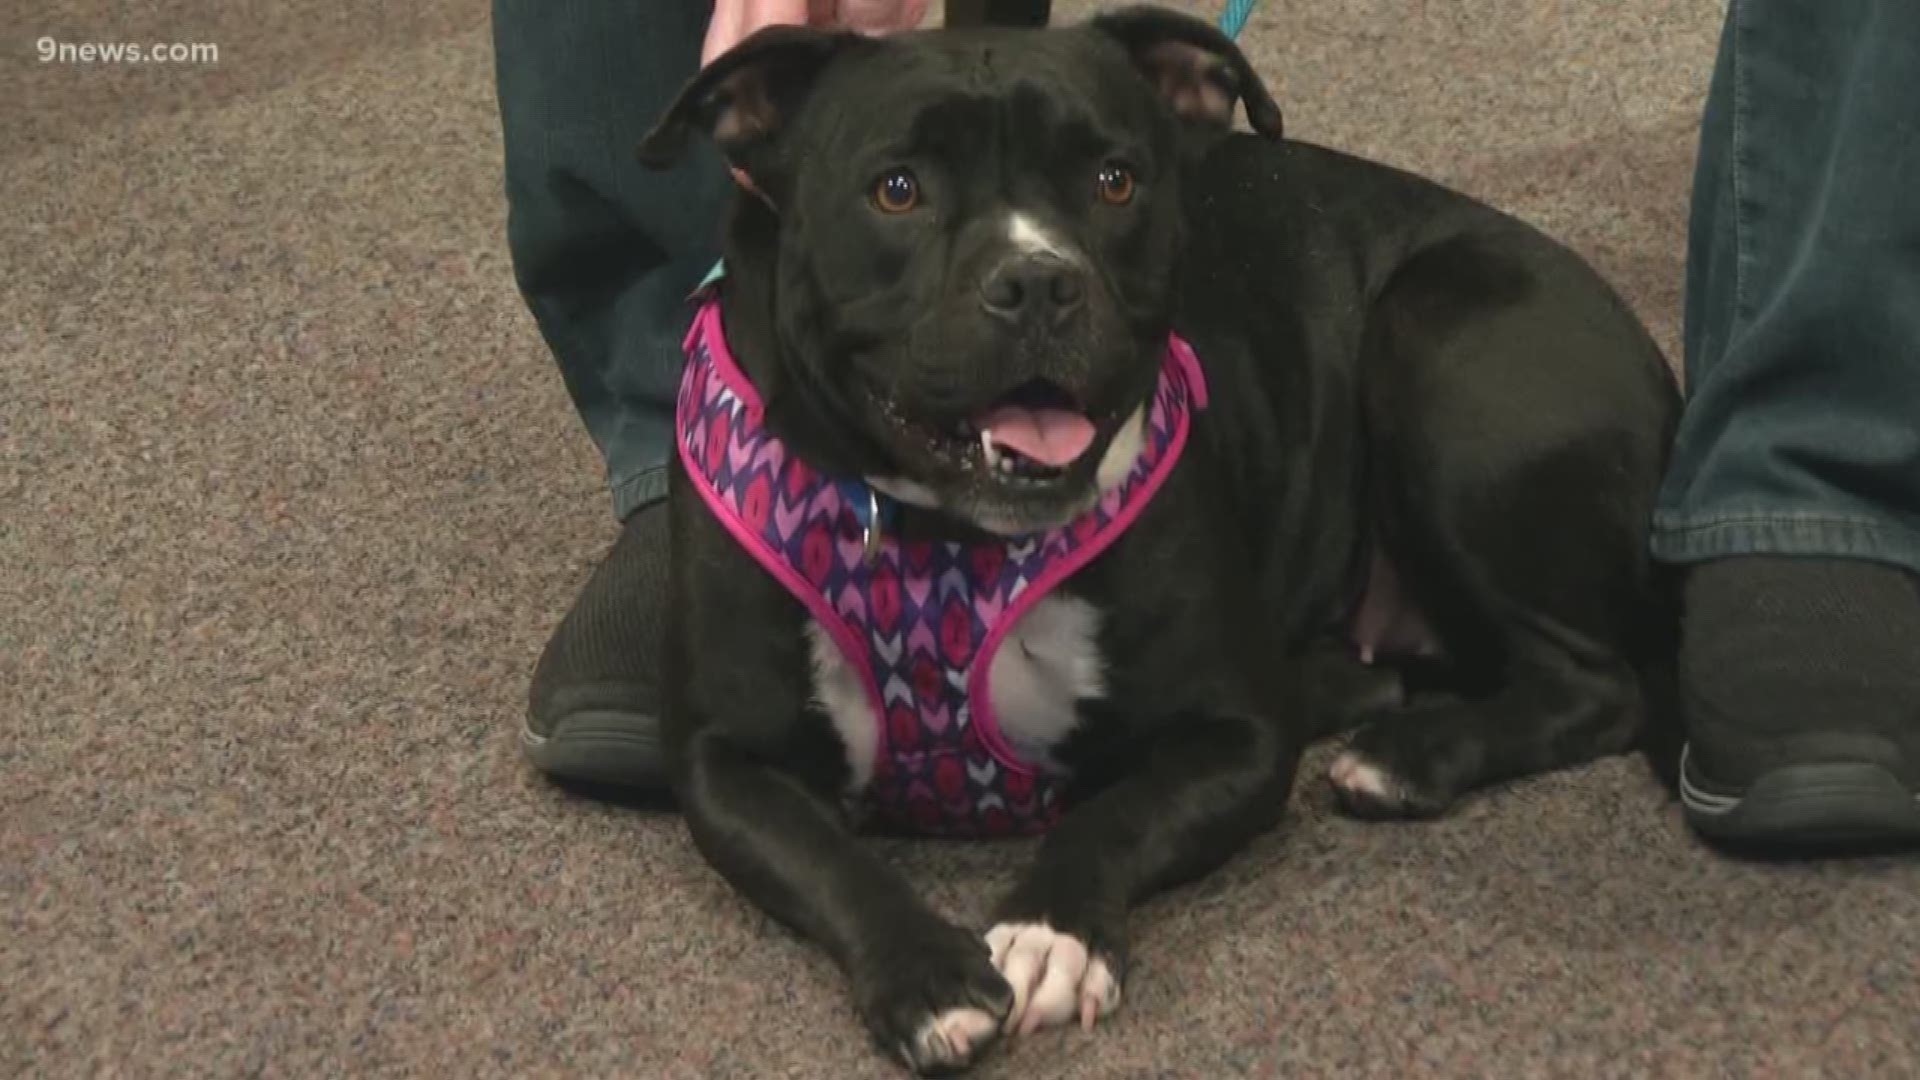 Hopper is a 2-year-old English Bulldog mix who will make the right family very happy. To adopt Hopper call the Adams County Animal Shelter at 720-523-7387.